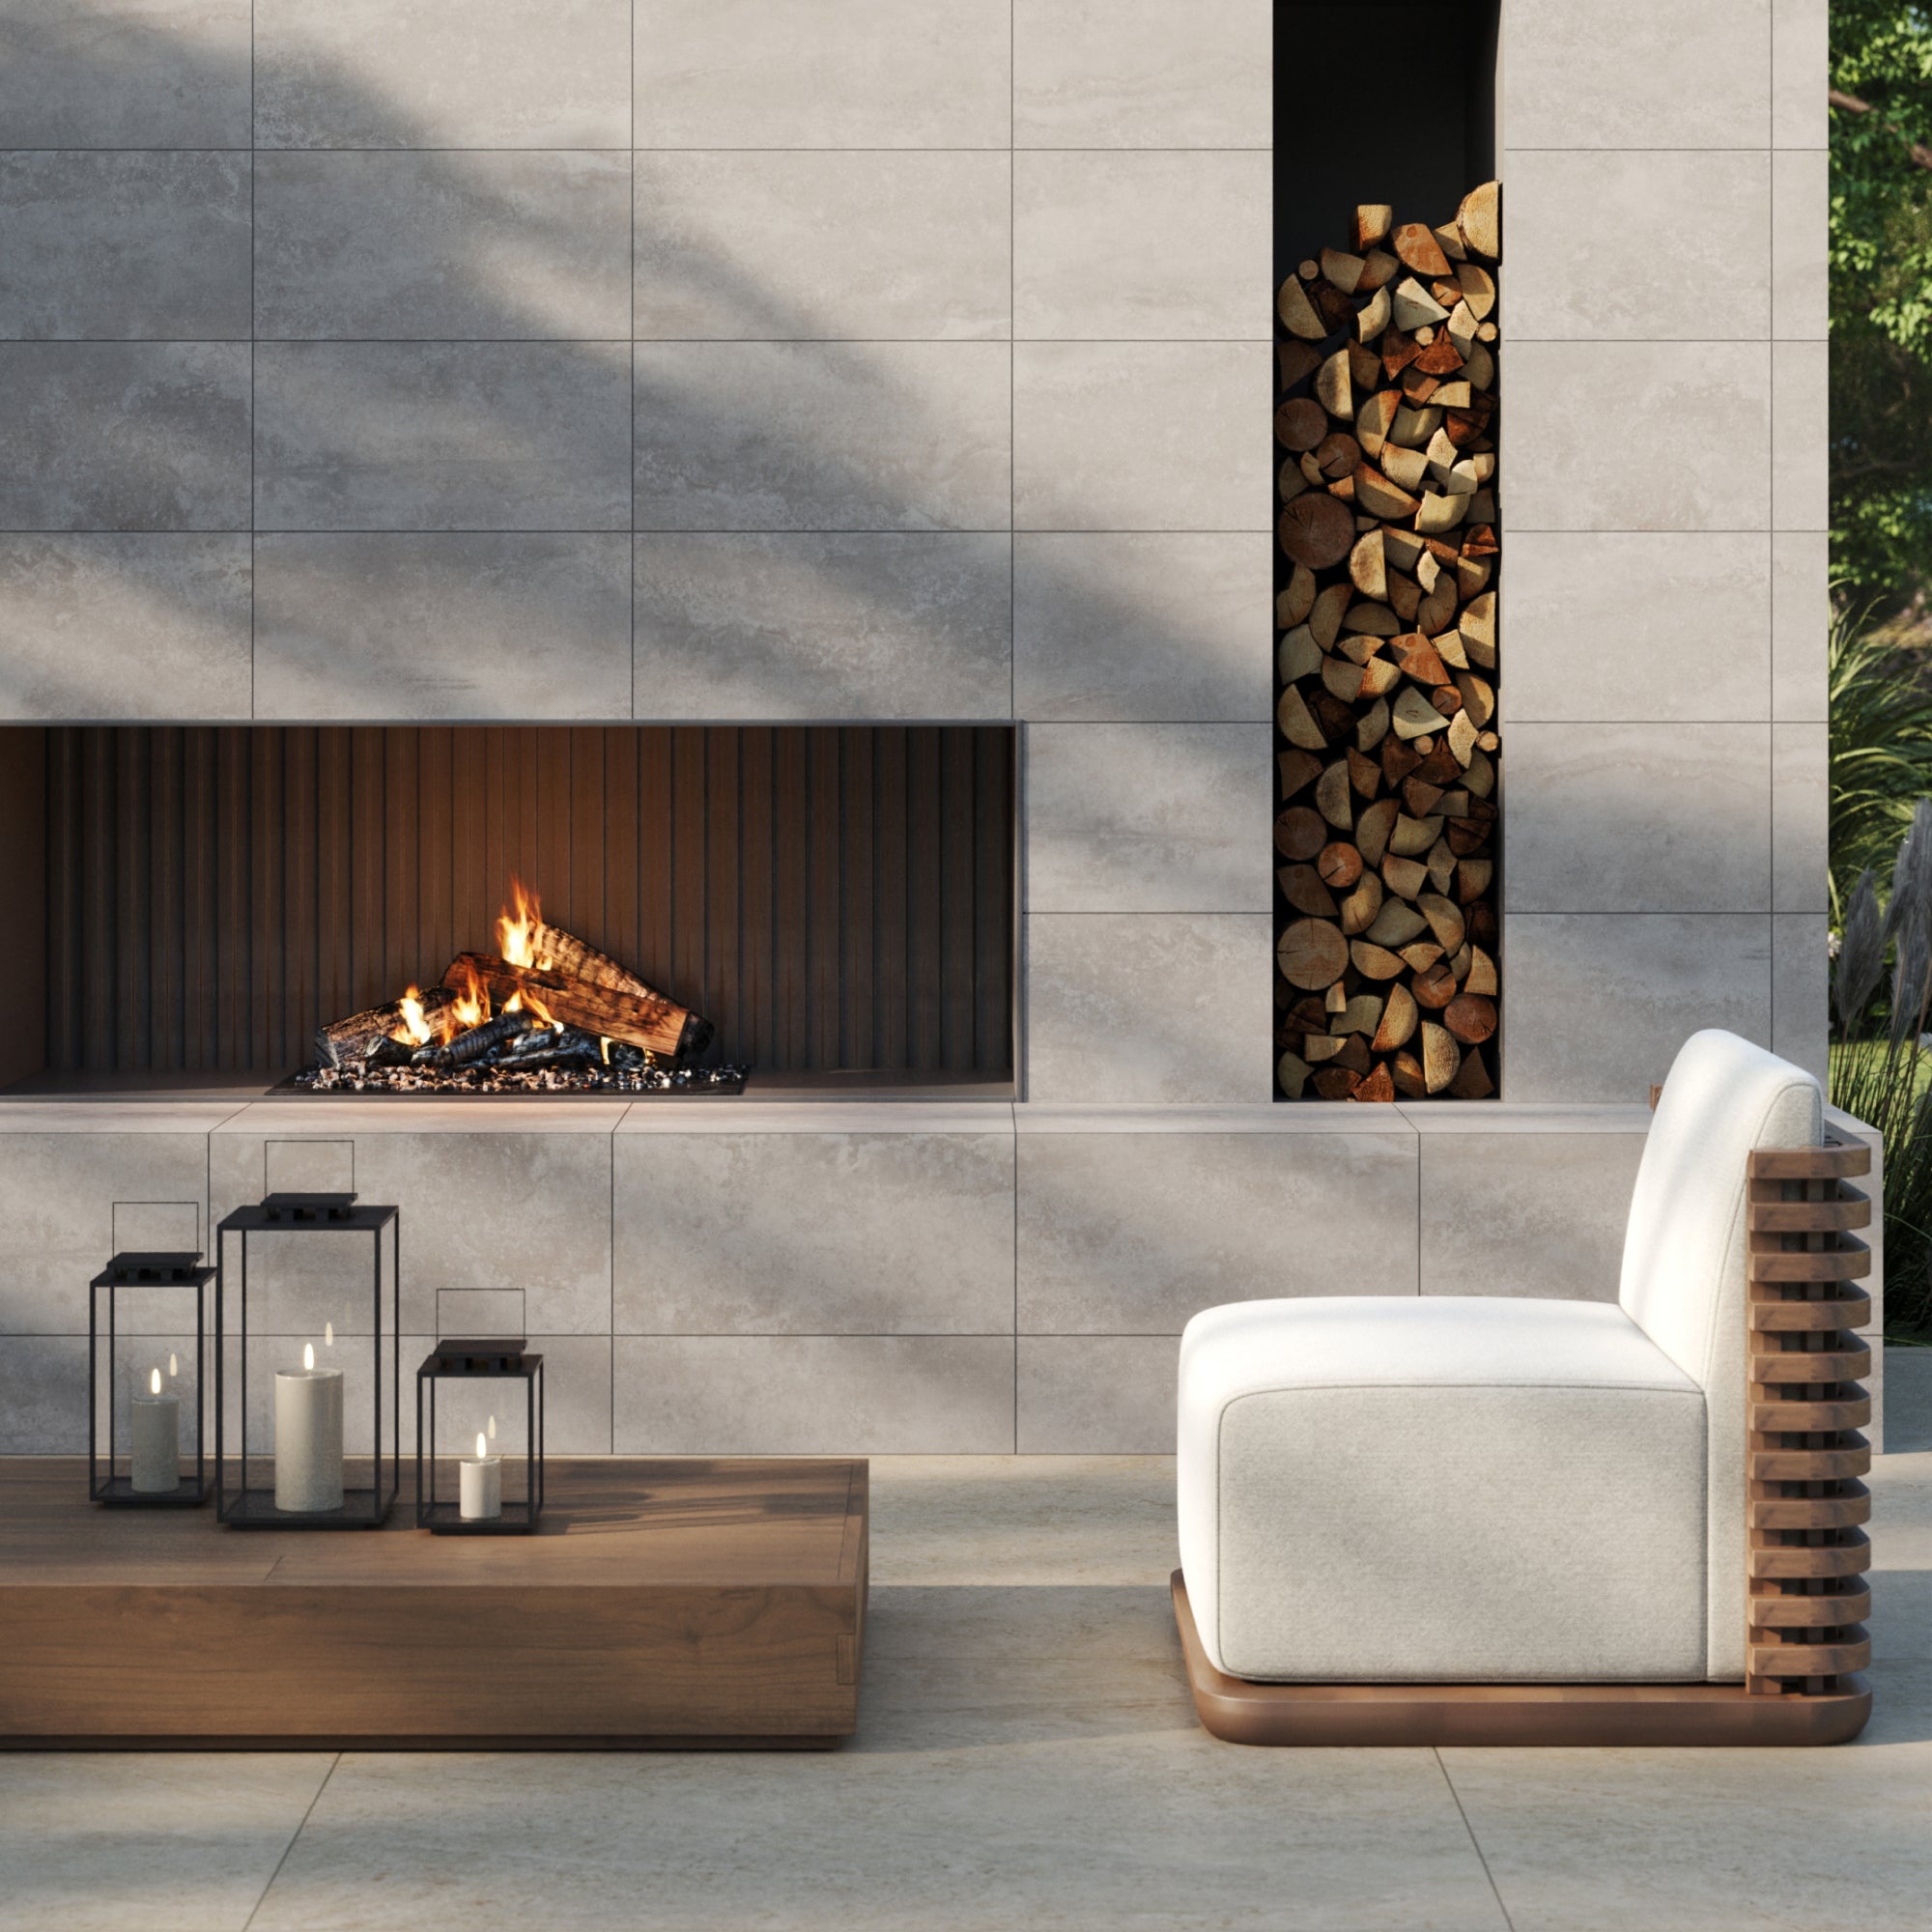 Step into a luxurious modern outdoor space, centered around a contemporary fireplace clad in Pierce 12x24 Matte Porcelain Tile in Stone. The concrete look tiles lend an industrial chic elegance, complementing the natural surroundings while offering a sophisticated, urban touch. Every detail, texture, and shade contributes to a space where modern design and natural beauty coexist seamlessly.